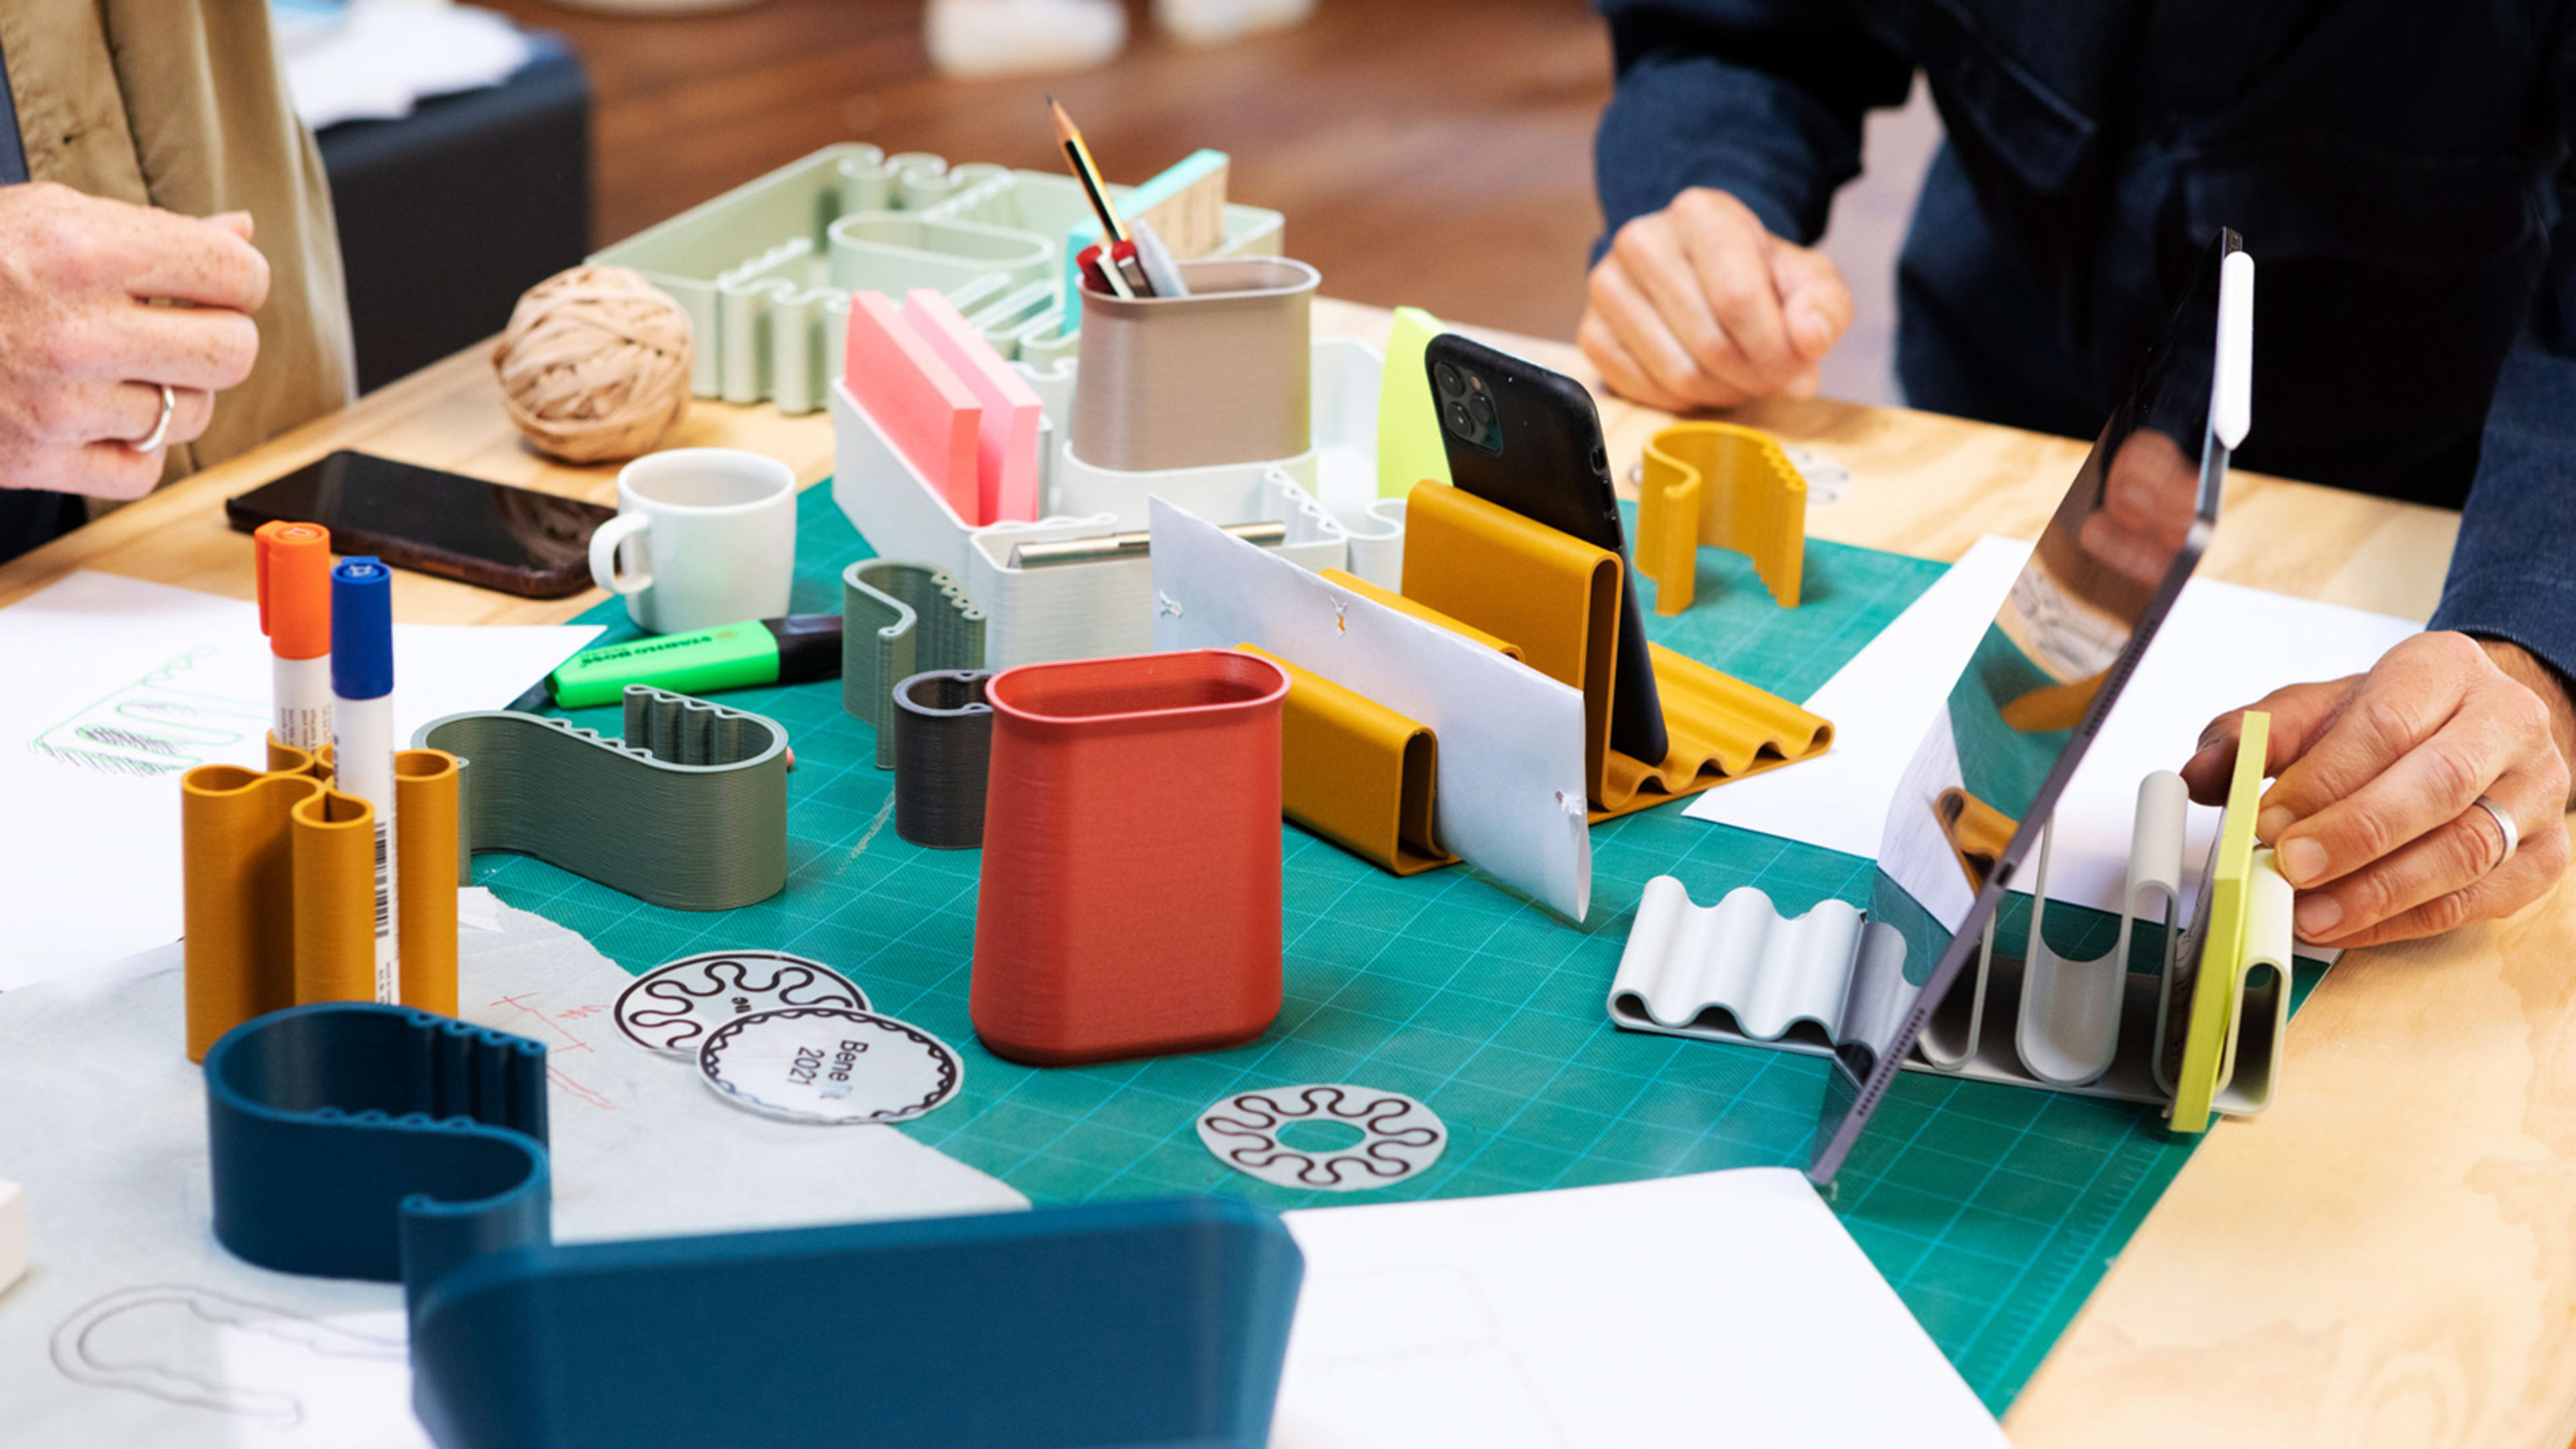 These playful desk accessories were 3D-printed using recycled food packaging